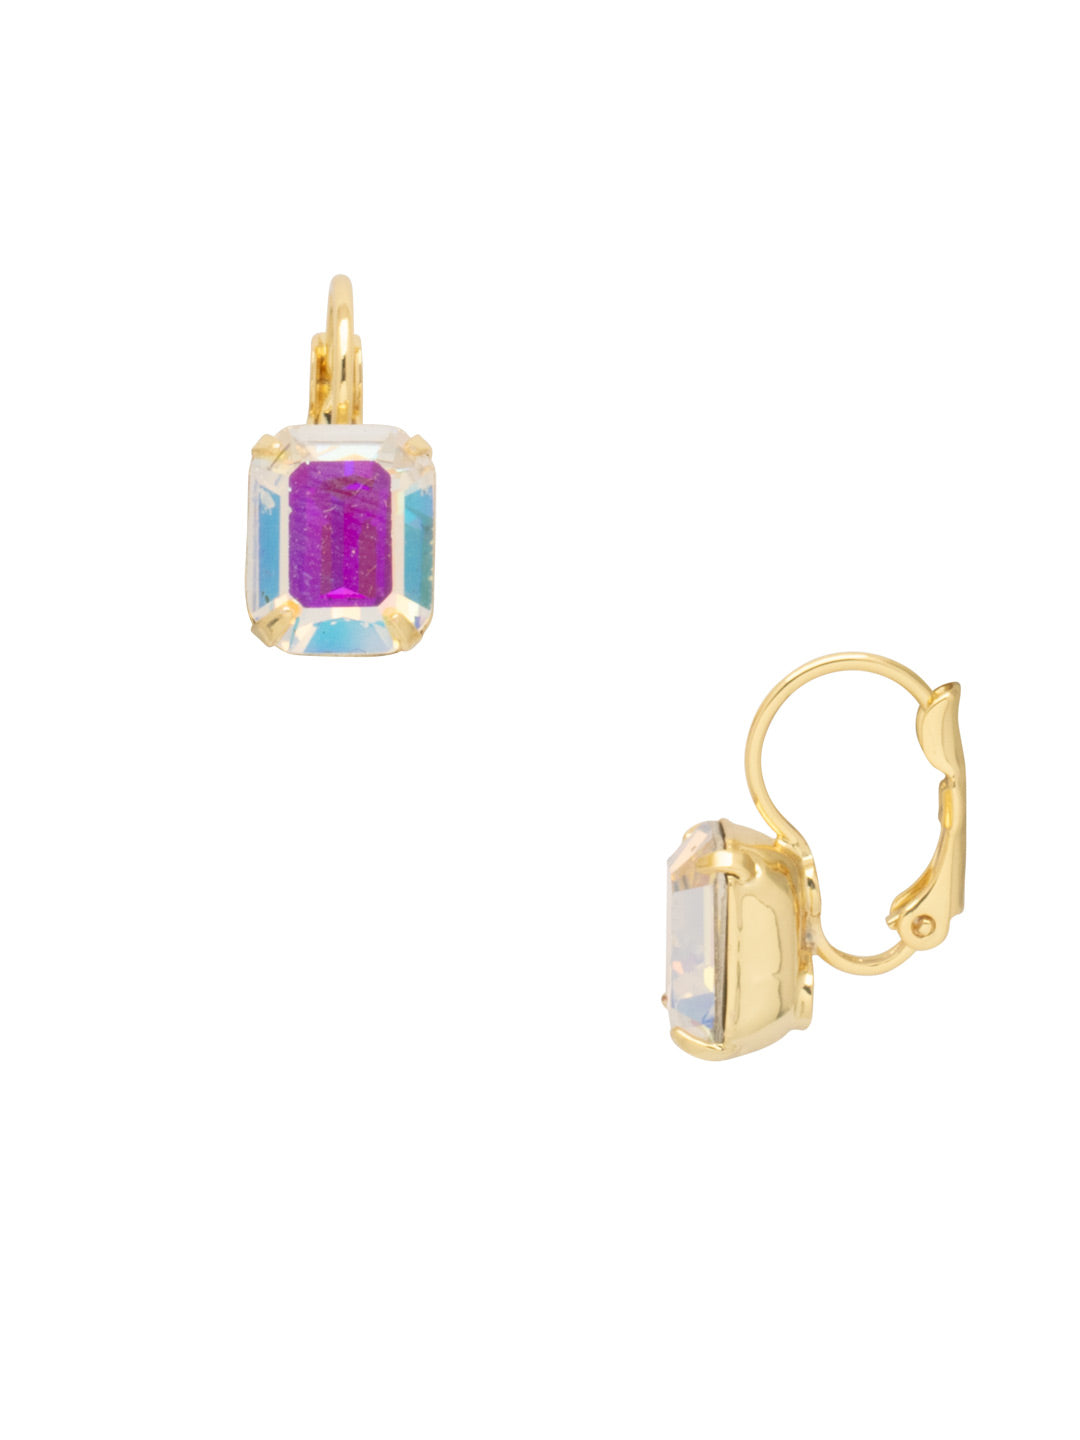 Octavia Dangle Earrings - EFK6BGCAB - <p>The Octavia Dangle Earrings feature a small emerald cut crystal dangling from a lever-back French wire. From Sorrelli's Crystal Aurora Borealis collection in our Bright Gold-tone finish.</p>